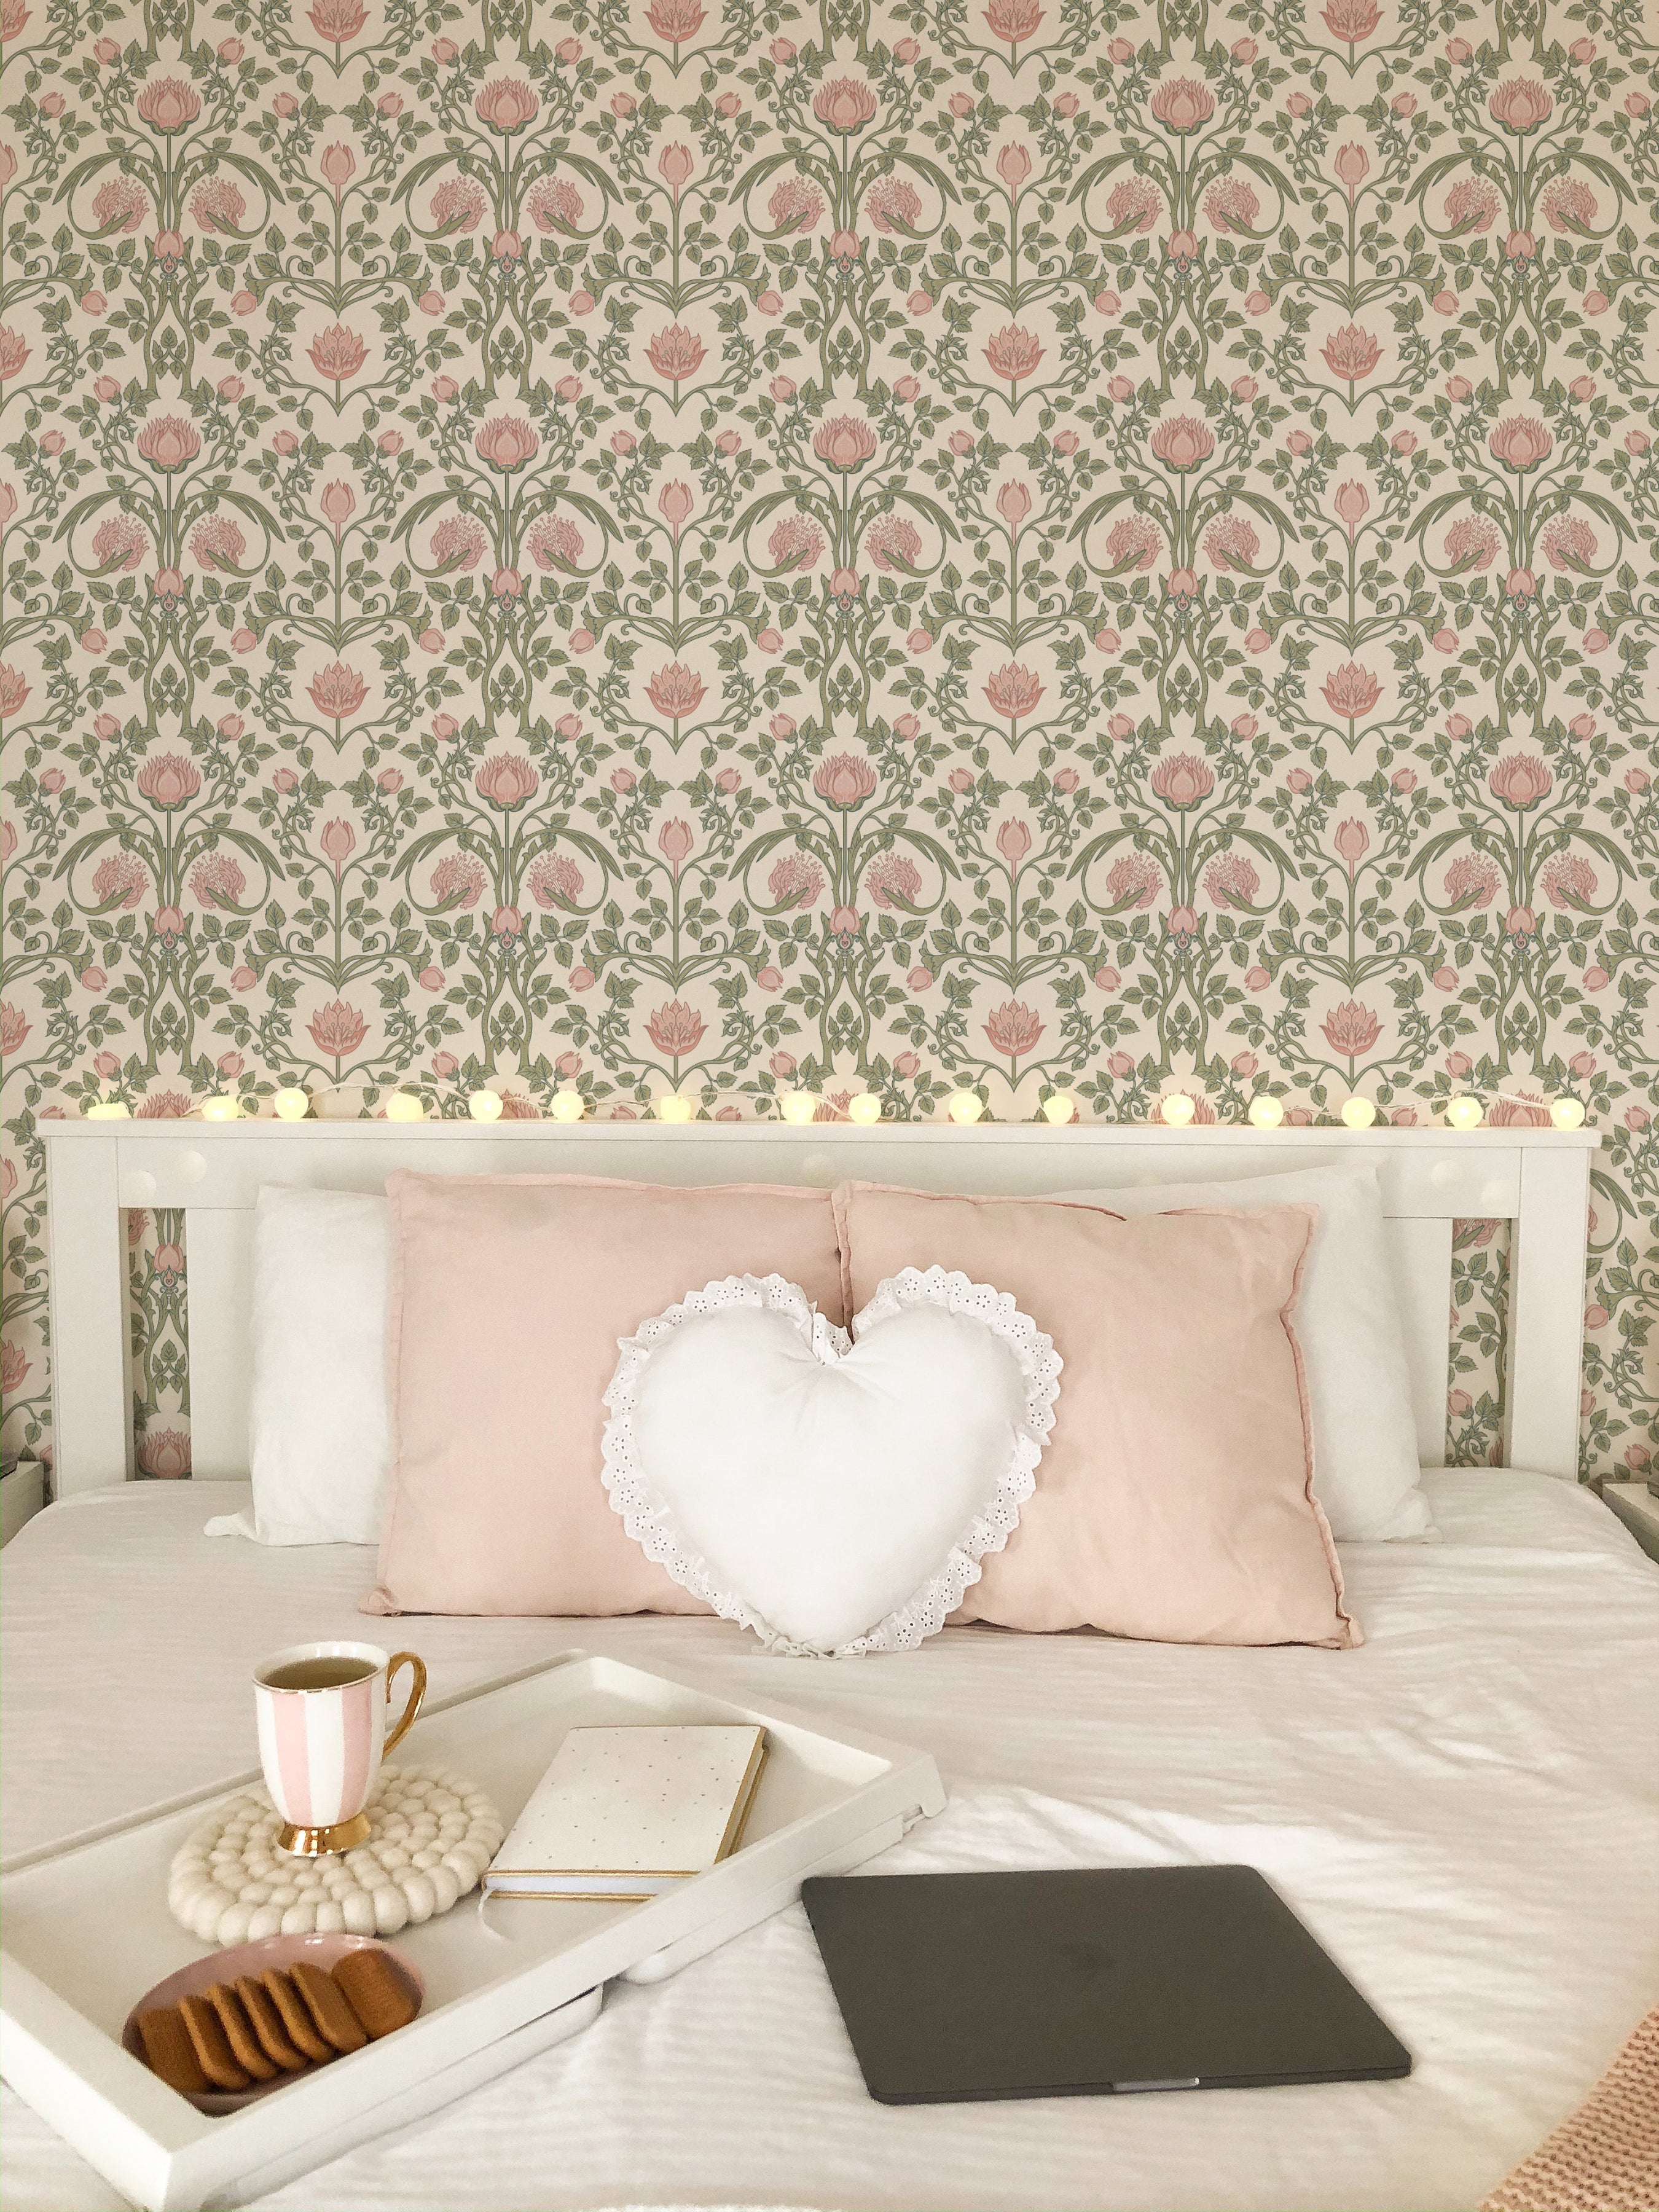 A romantic bedroom ambiance with glowing string lights over a bed, plush pink pillows, a heart-shaped cushion, and the pastel floral damask wallpaper creating a dreamy space